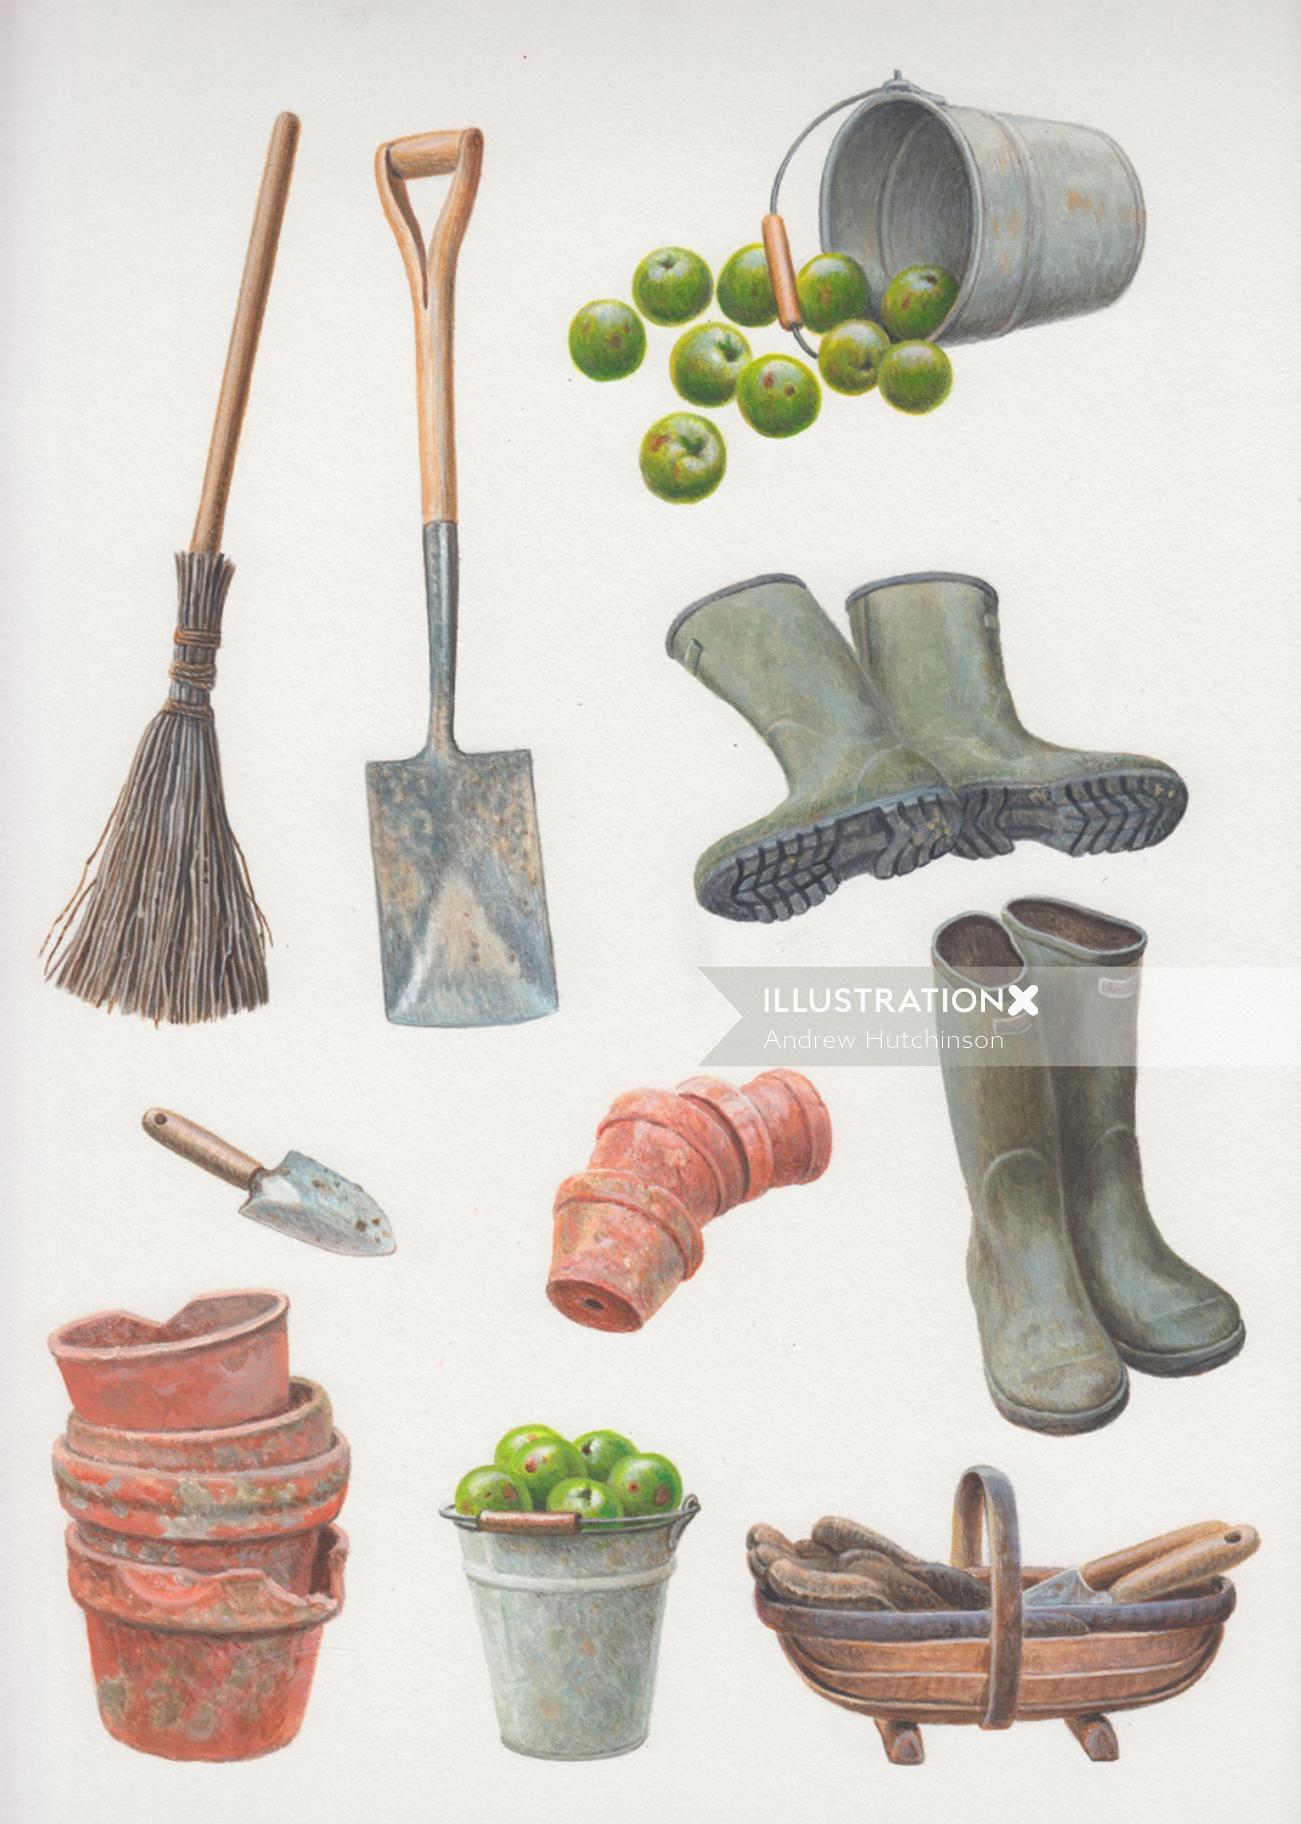 Tools for garden